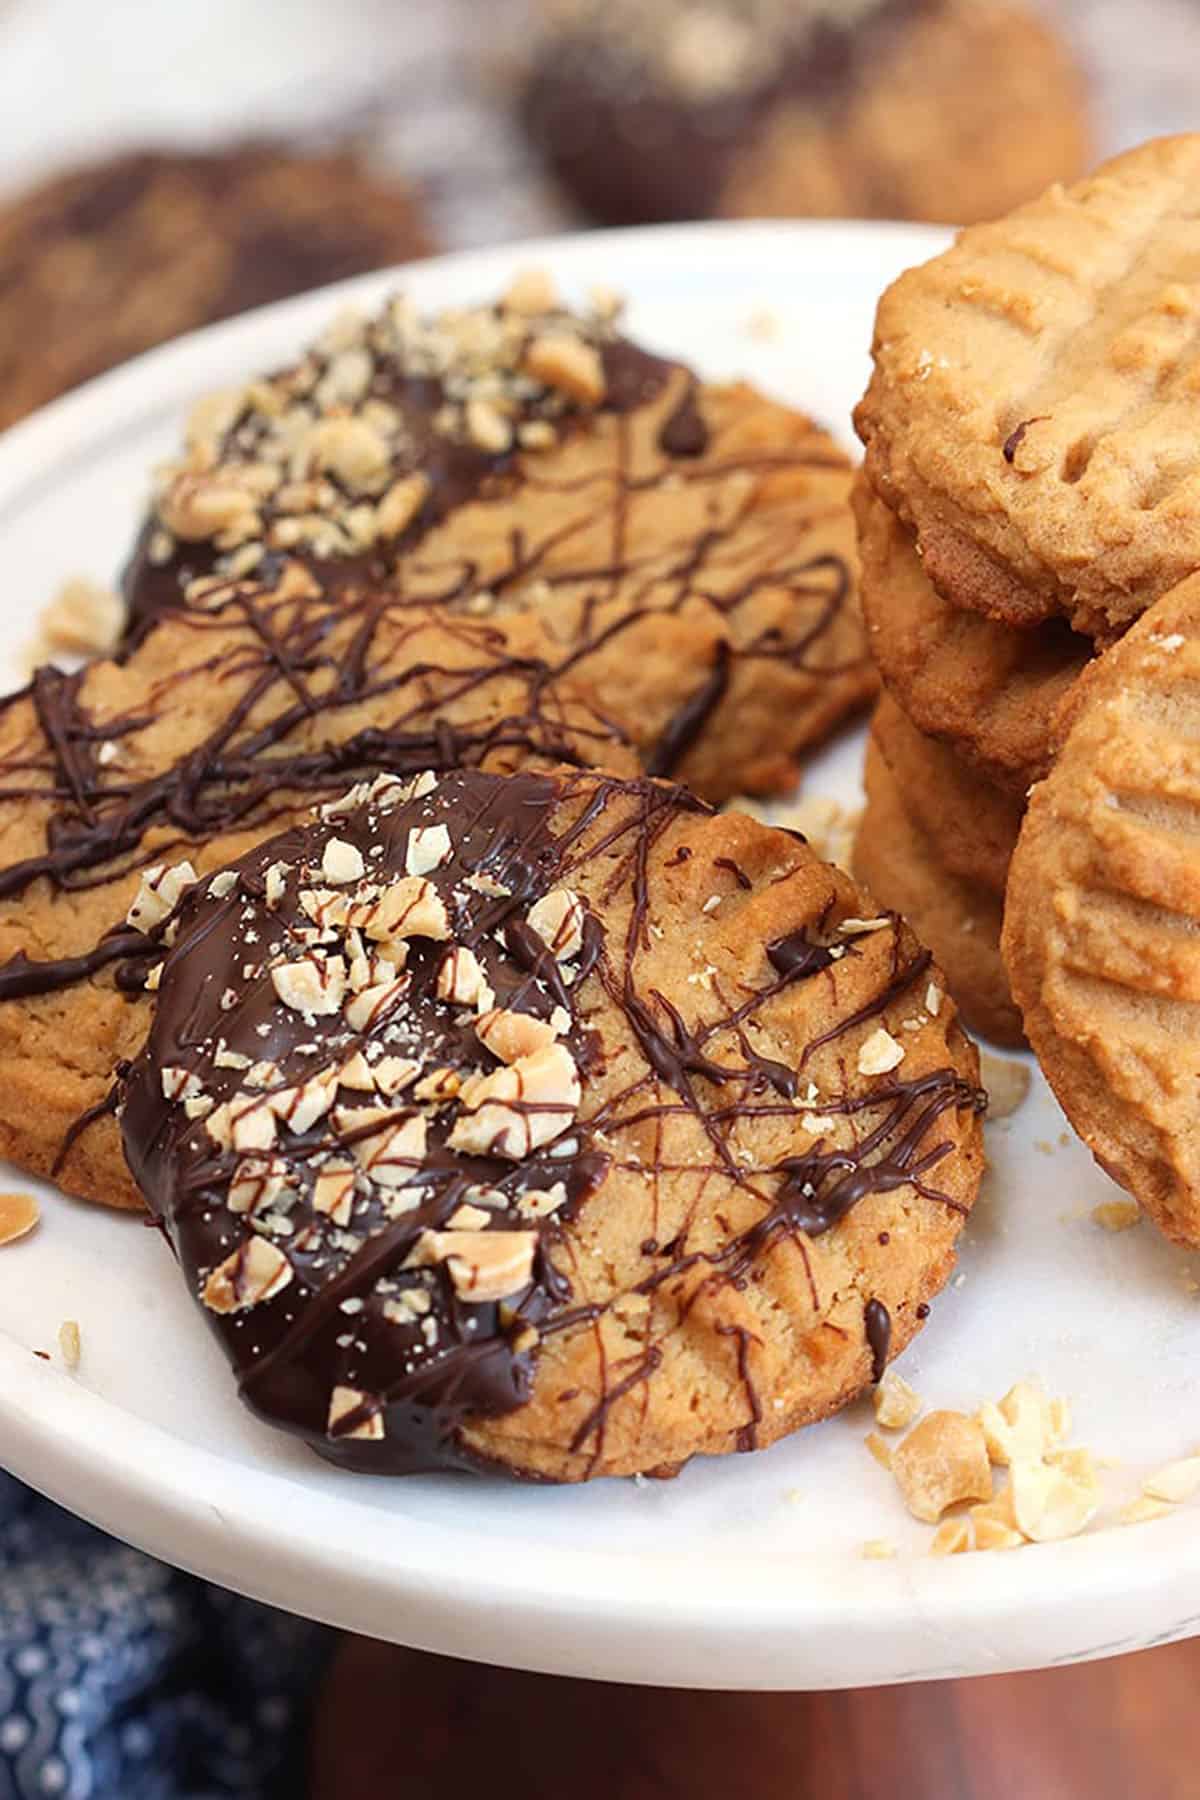 Peanut butter cookie dipped in chocolate on a plate with other peanut butter cookies.